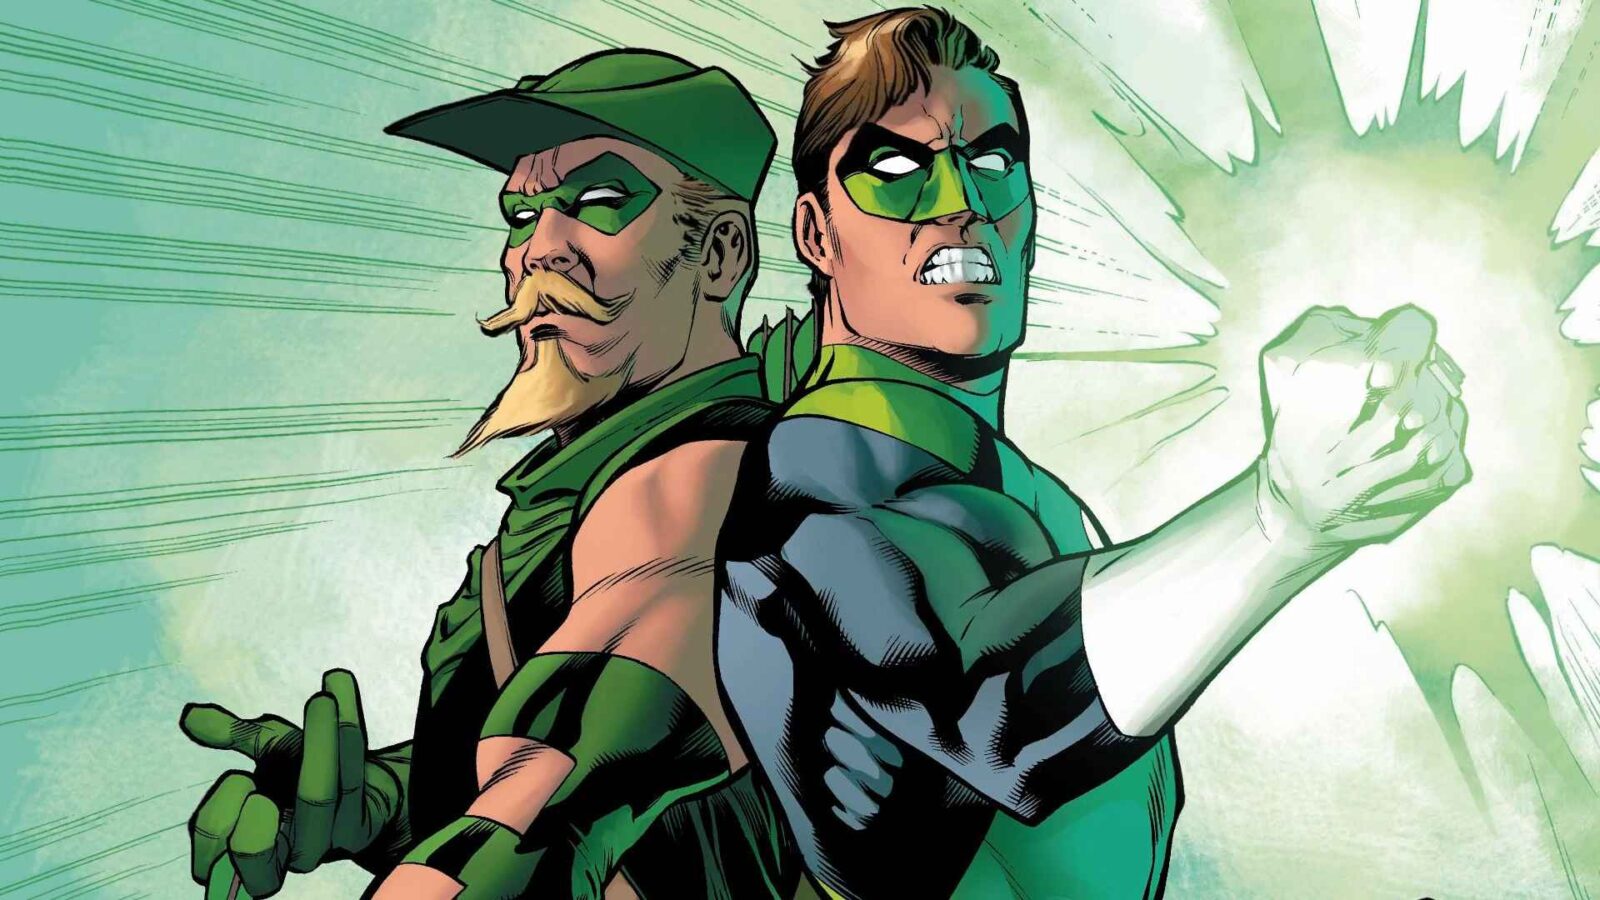 LiveWallpapers4Free.com | Funny Team Green Lantern And Green Arrow - Free Live Wallpaper